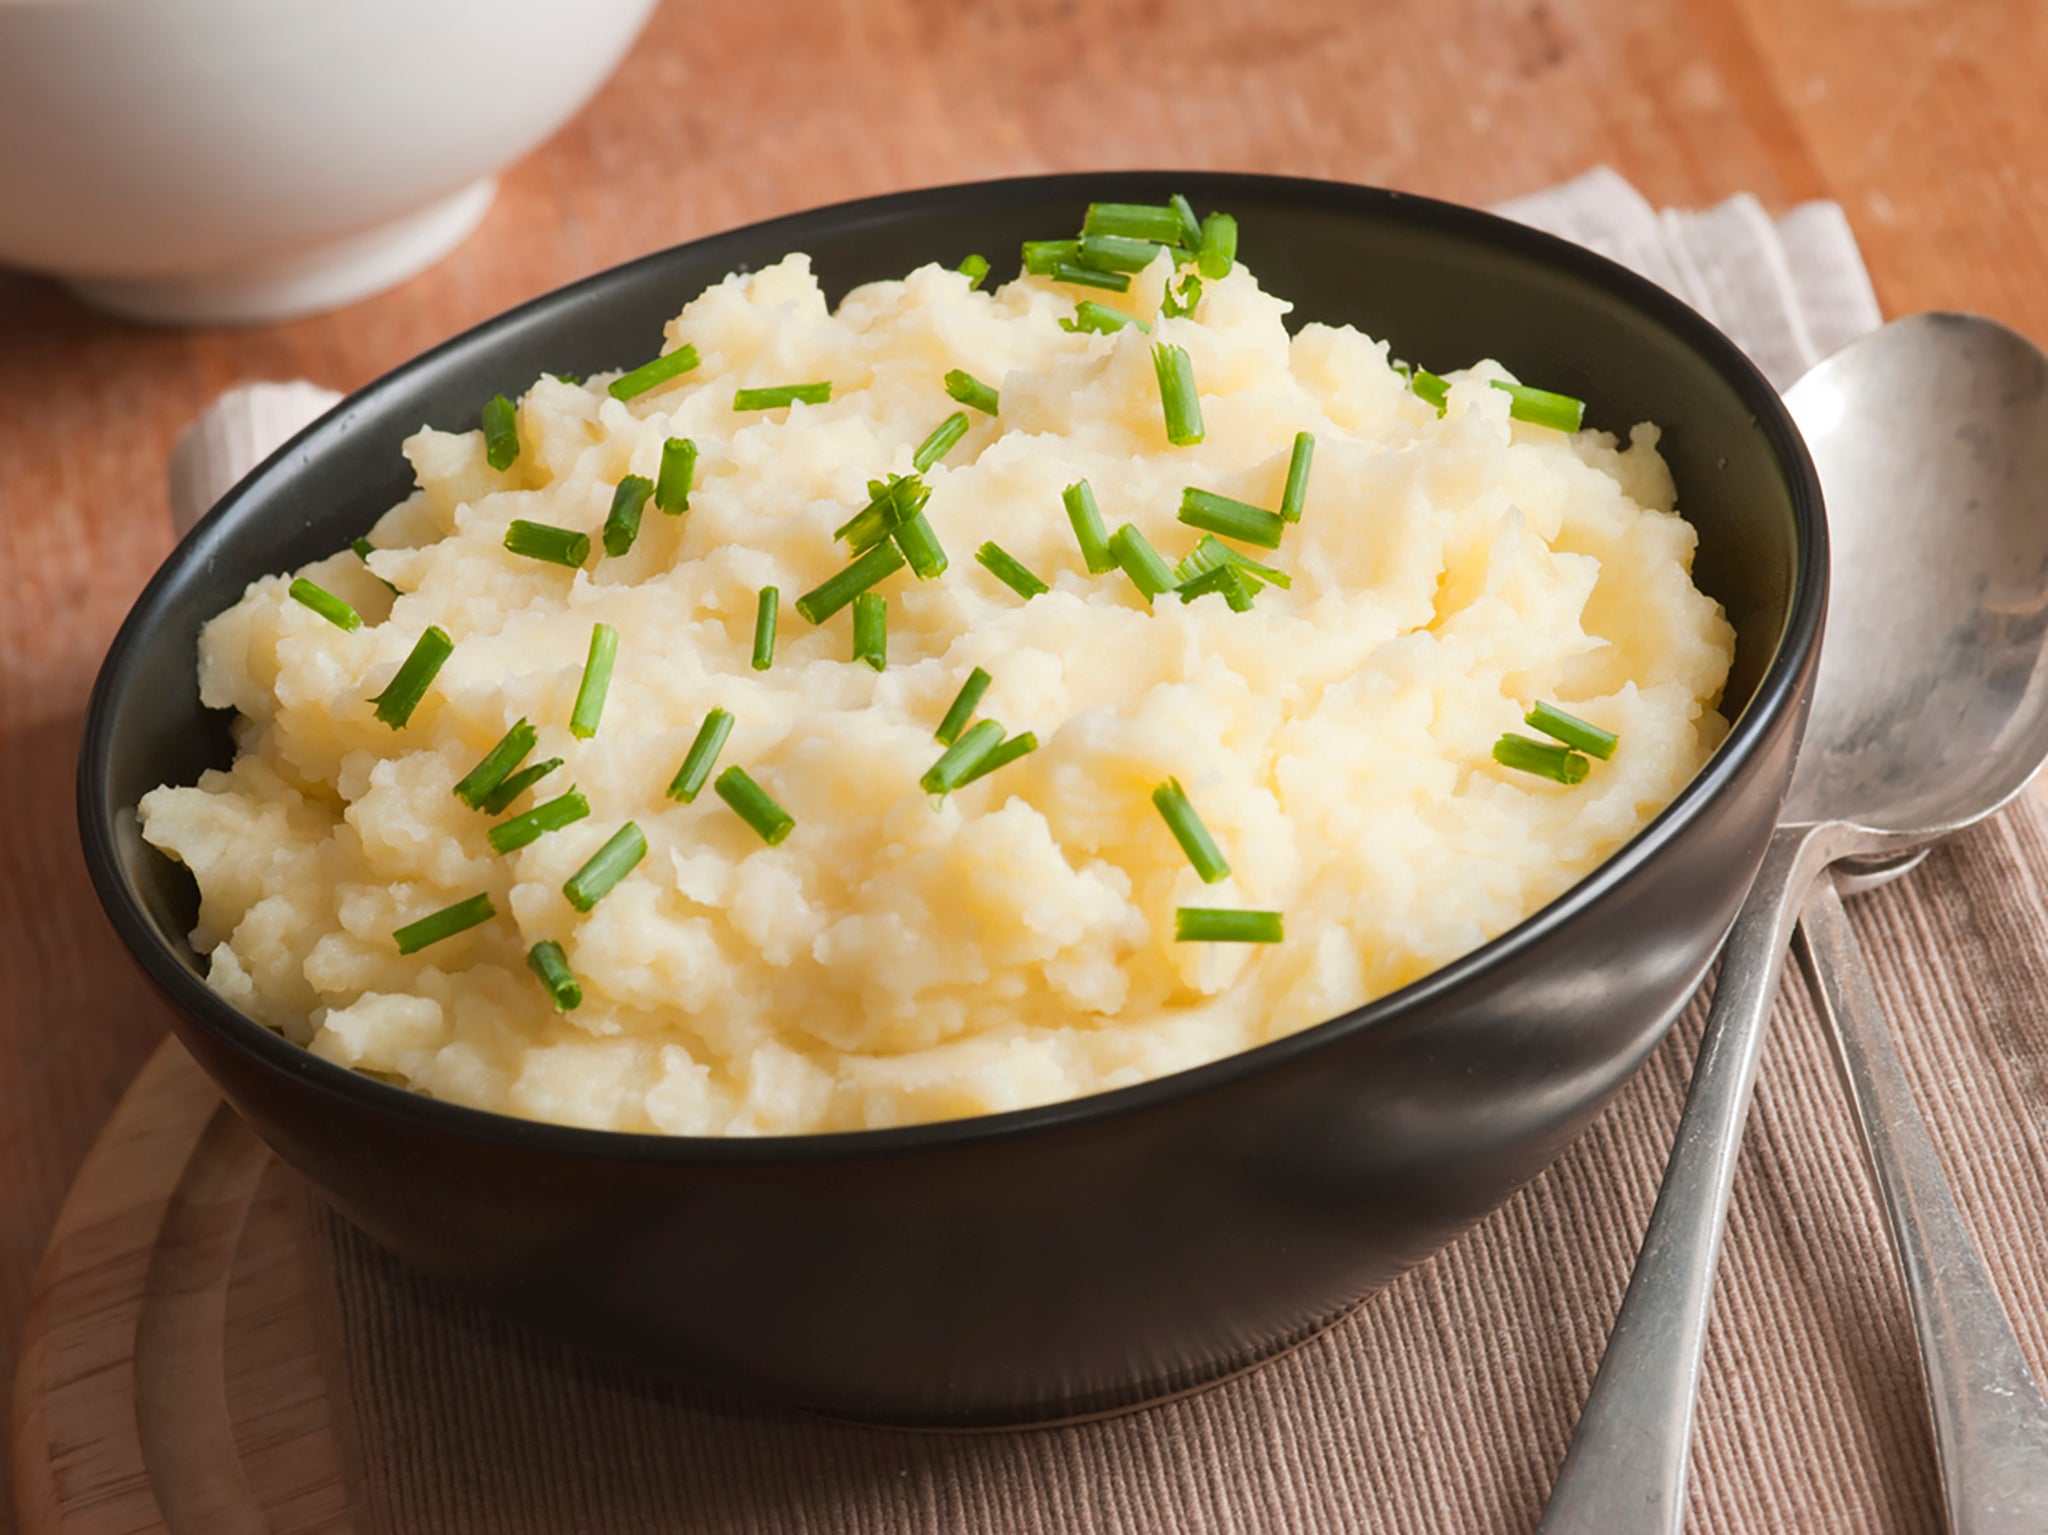 Creamy, rich mashed potatoes made with air-fried potatoes for a unique roasted flavor